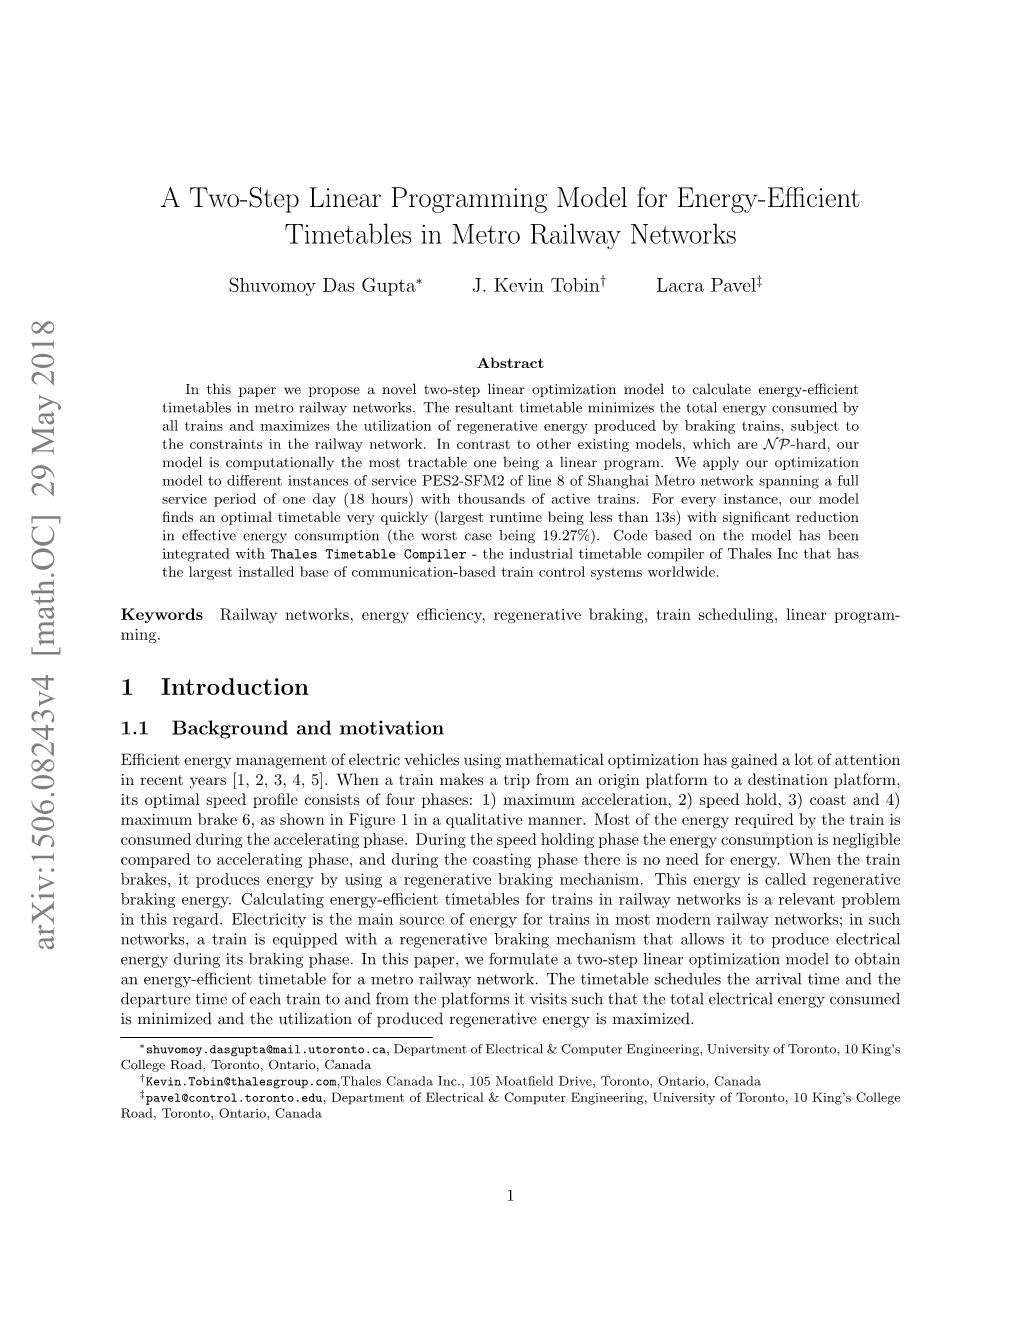 A Two-Step Linear Programming Model for Energy-Efficient Timetables in Metro Railway Networks